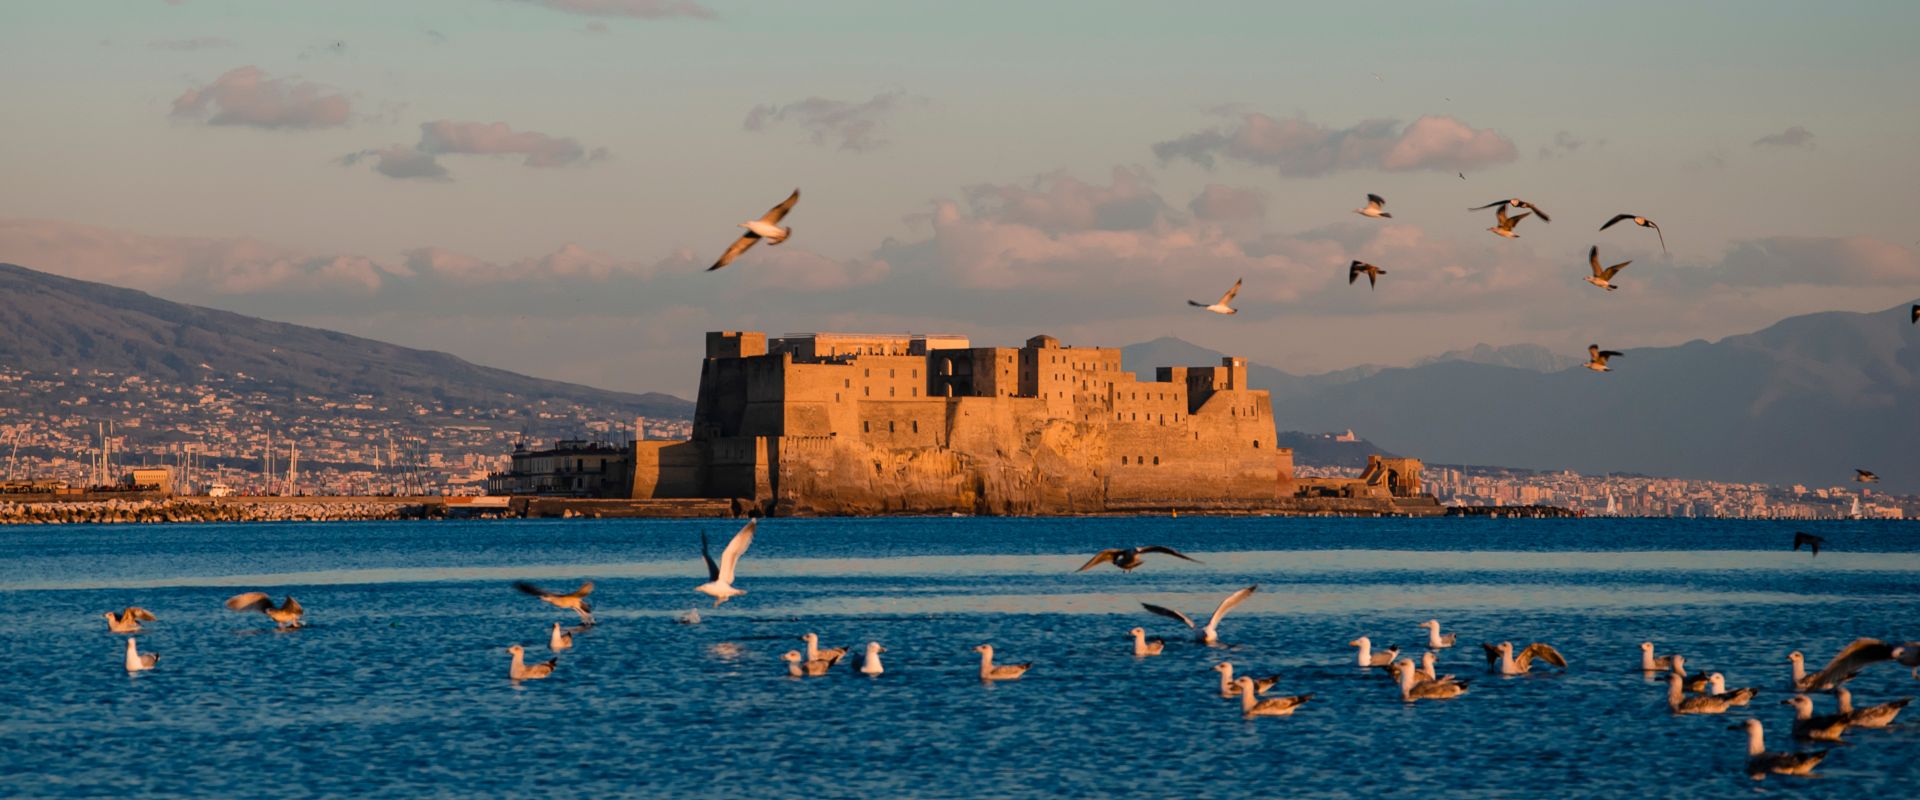 A flock of seagulls flying on sunset time on Castel dell'Ovo background over the sea in Naples, Italy. Egg Castle. Travel in Europe concept. Copy space. Selective focus on Castle.